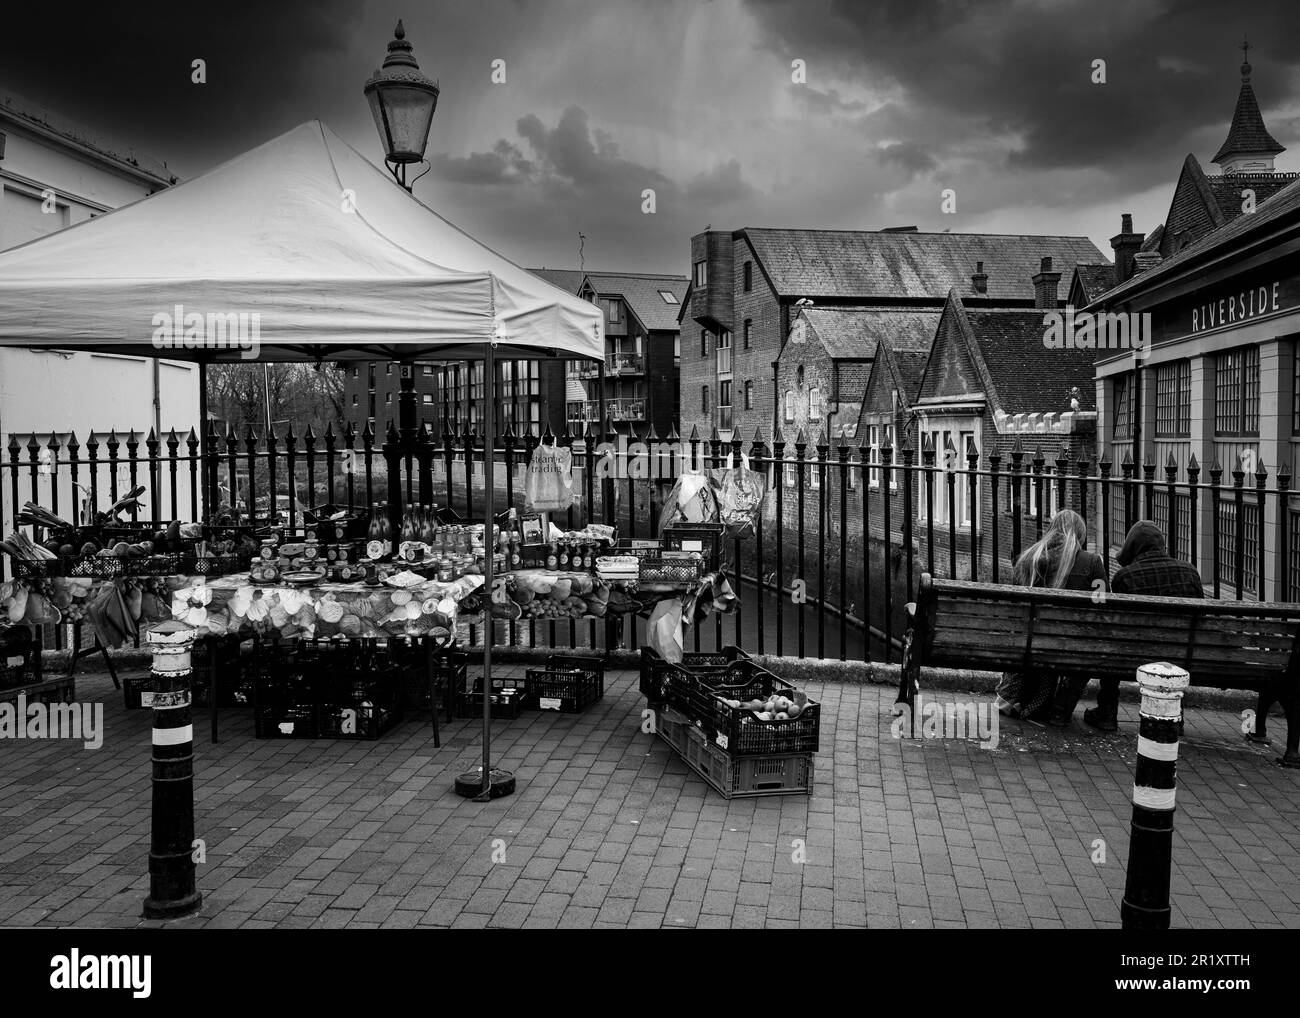 An atmospheric Black and white image of a market stall on the river bridge in Lewes East Sussex on a stormy day Stock Photo